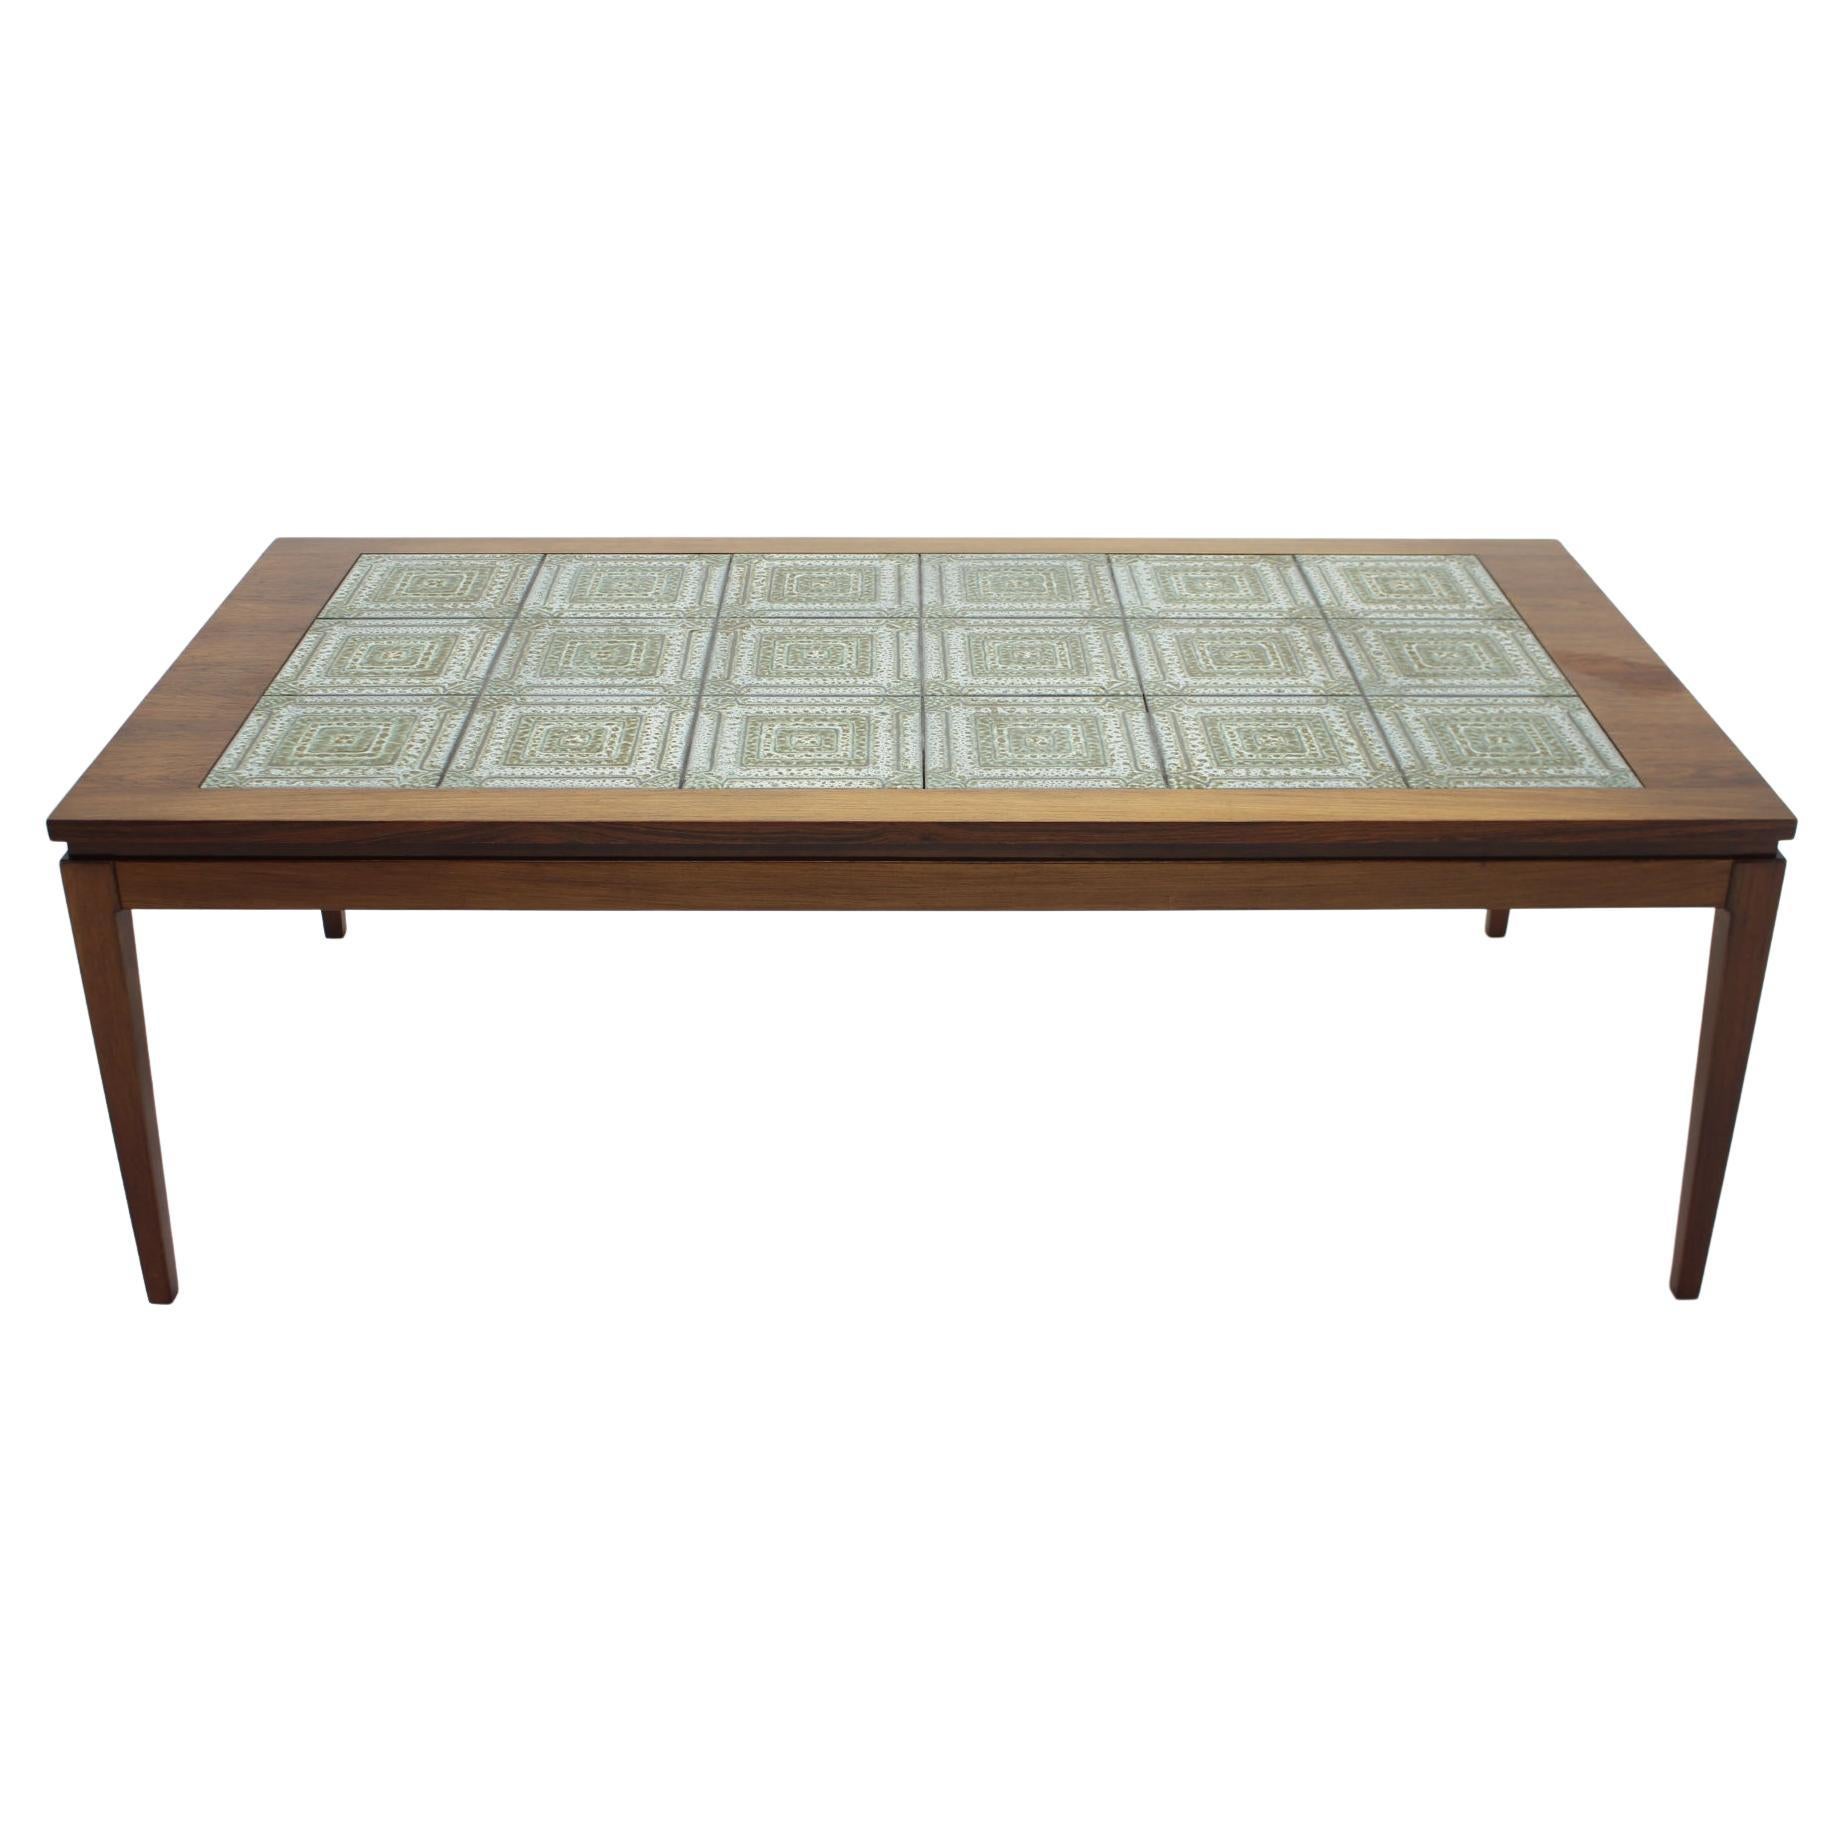 1960s Palisander and Tile Coffee Table, Denmark For Sale